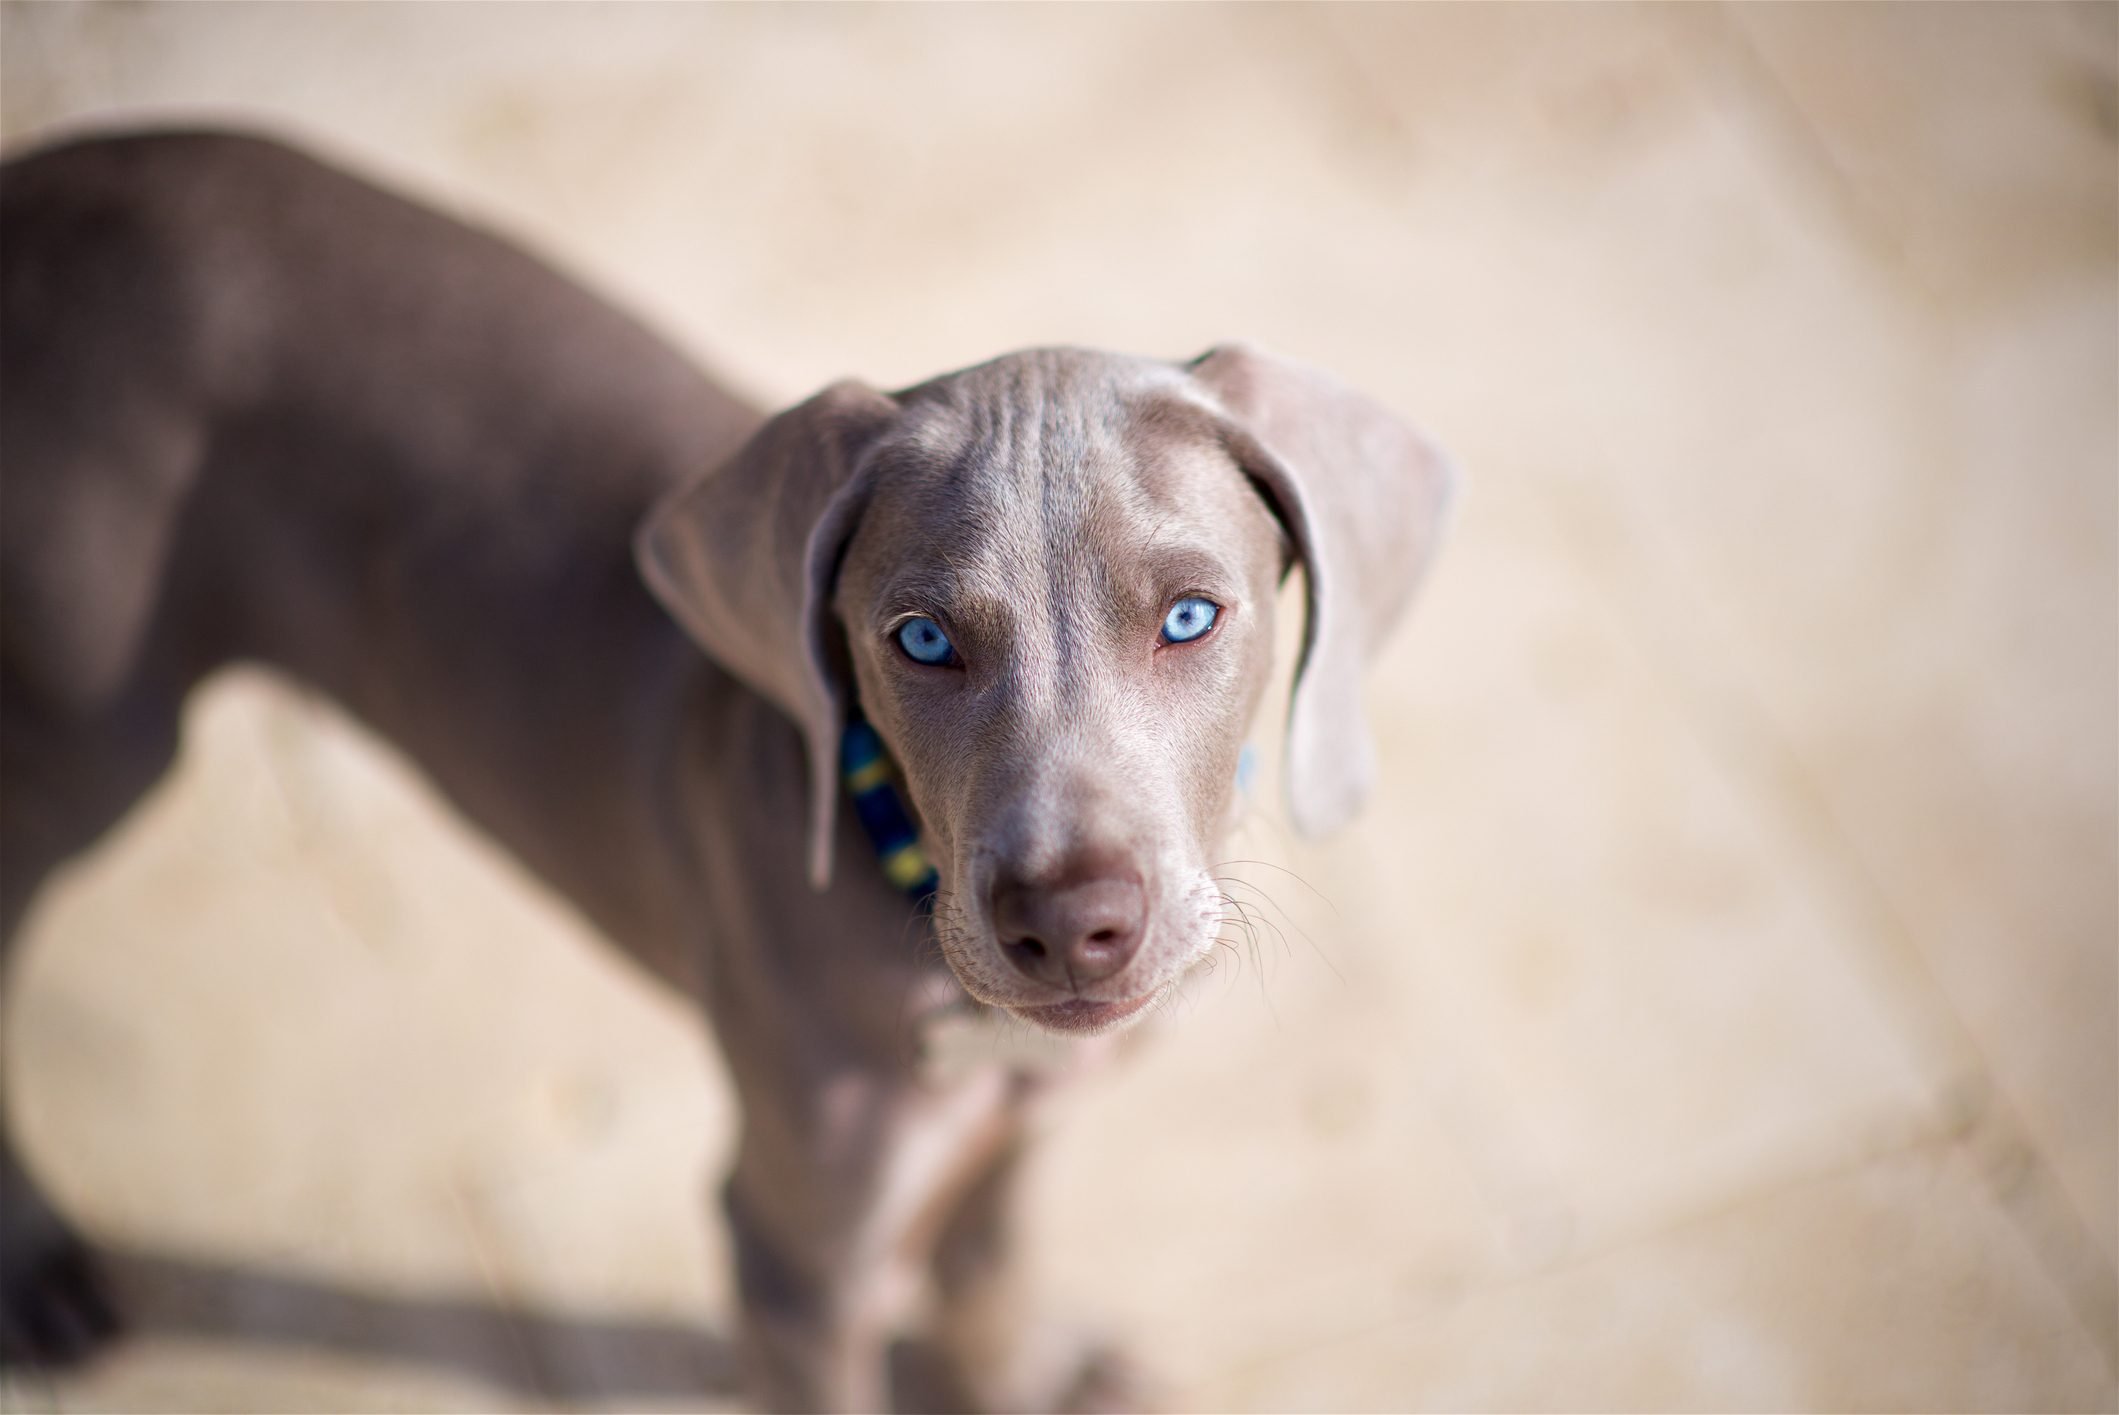 12 Dog Breeds With Blue Eyes That Are Stunning